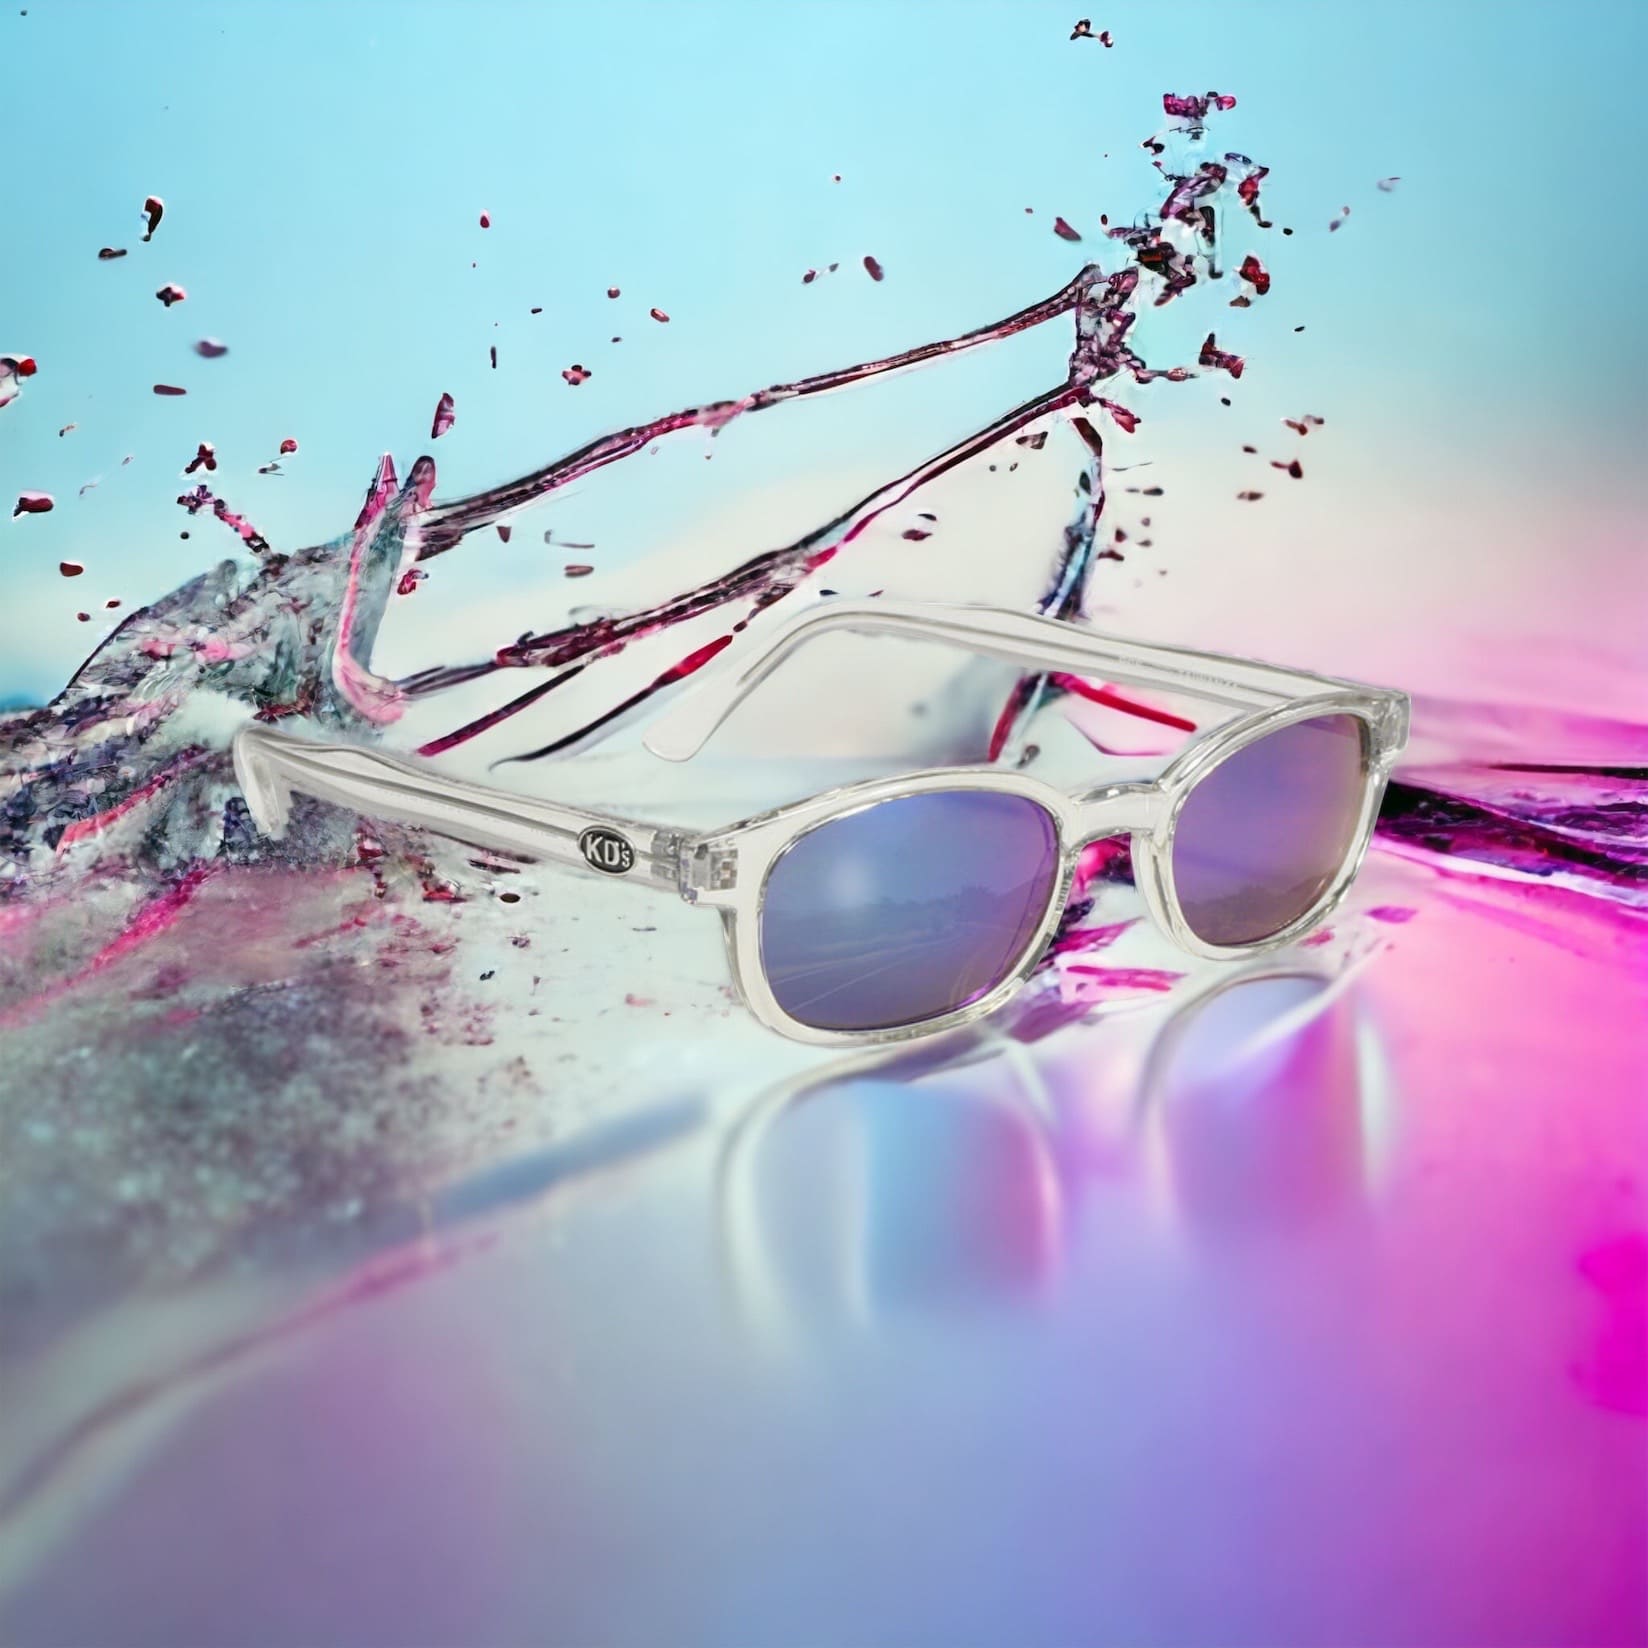 Great original X-KD's Crystal 12018 sunglasses with a sublime transparent frame and iridescent polycarbonate mirror lenses in an explosion of colors.